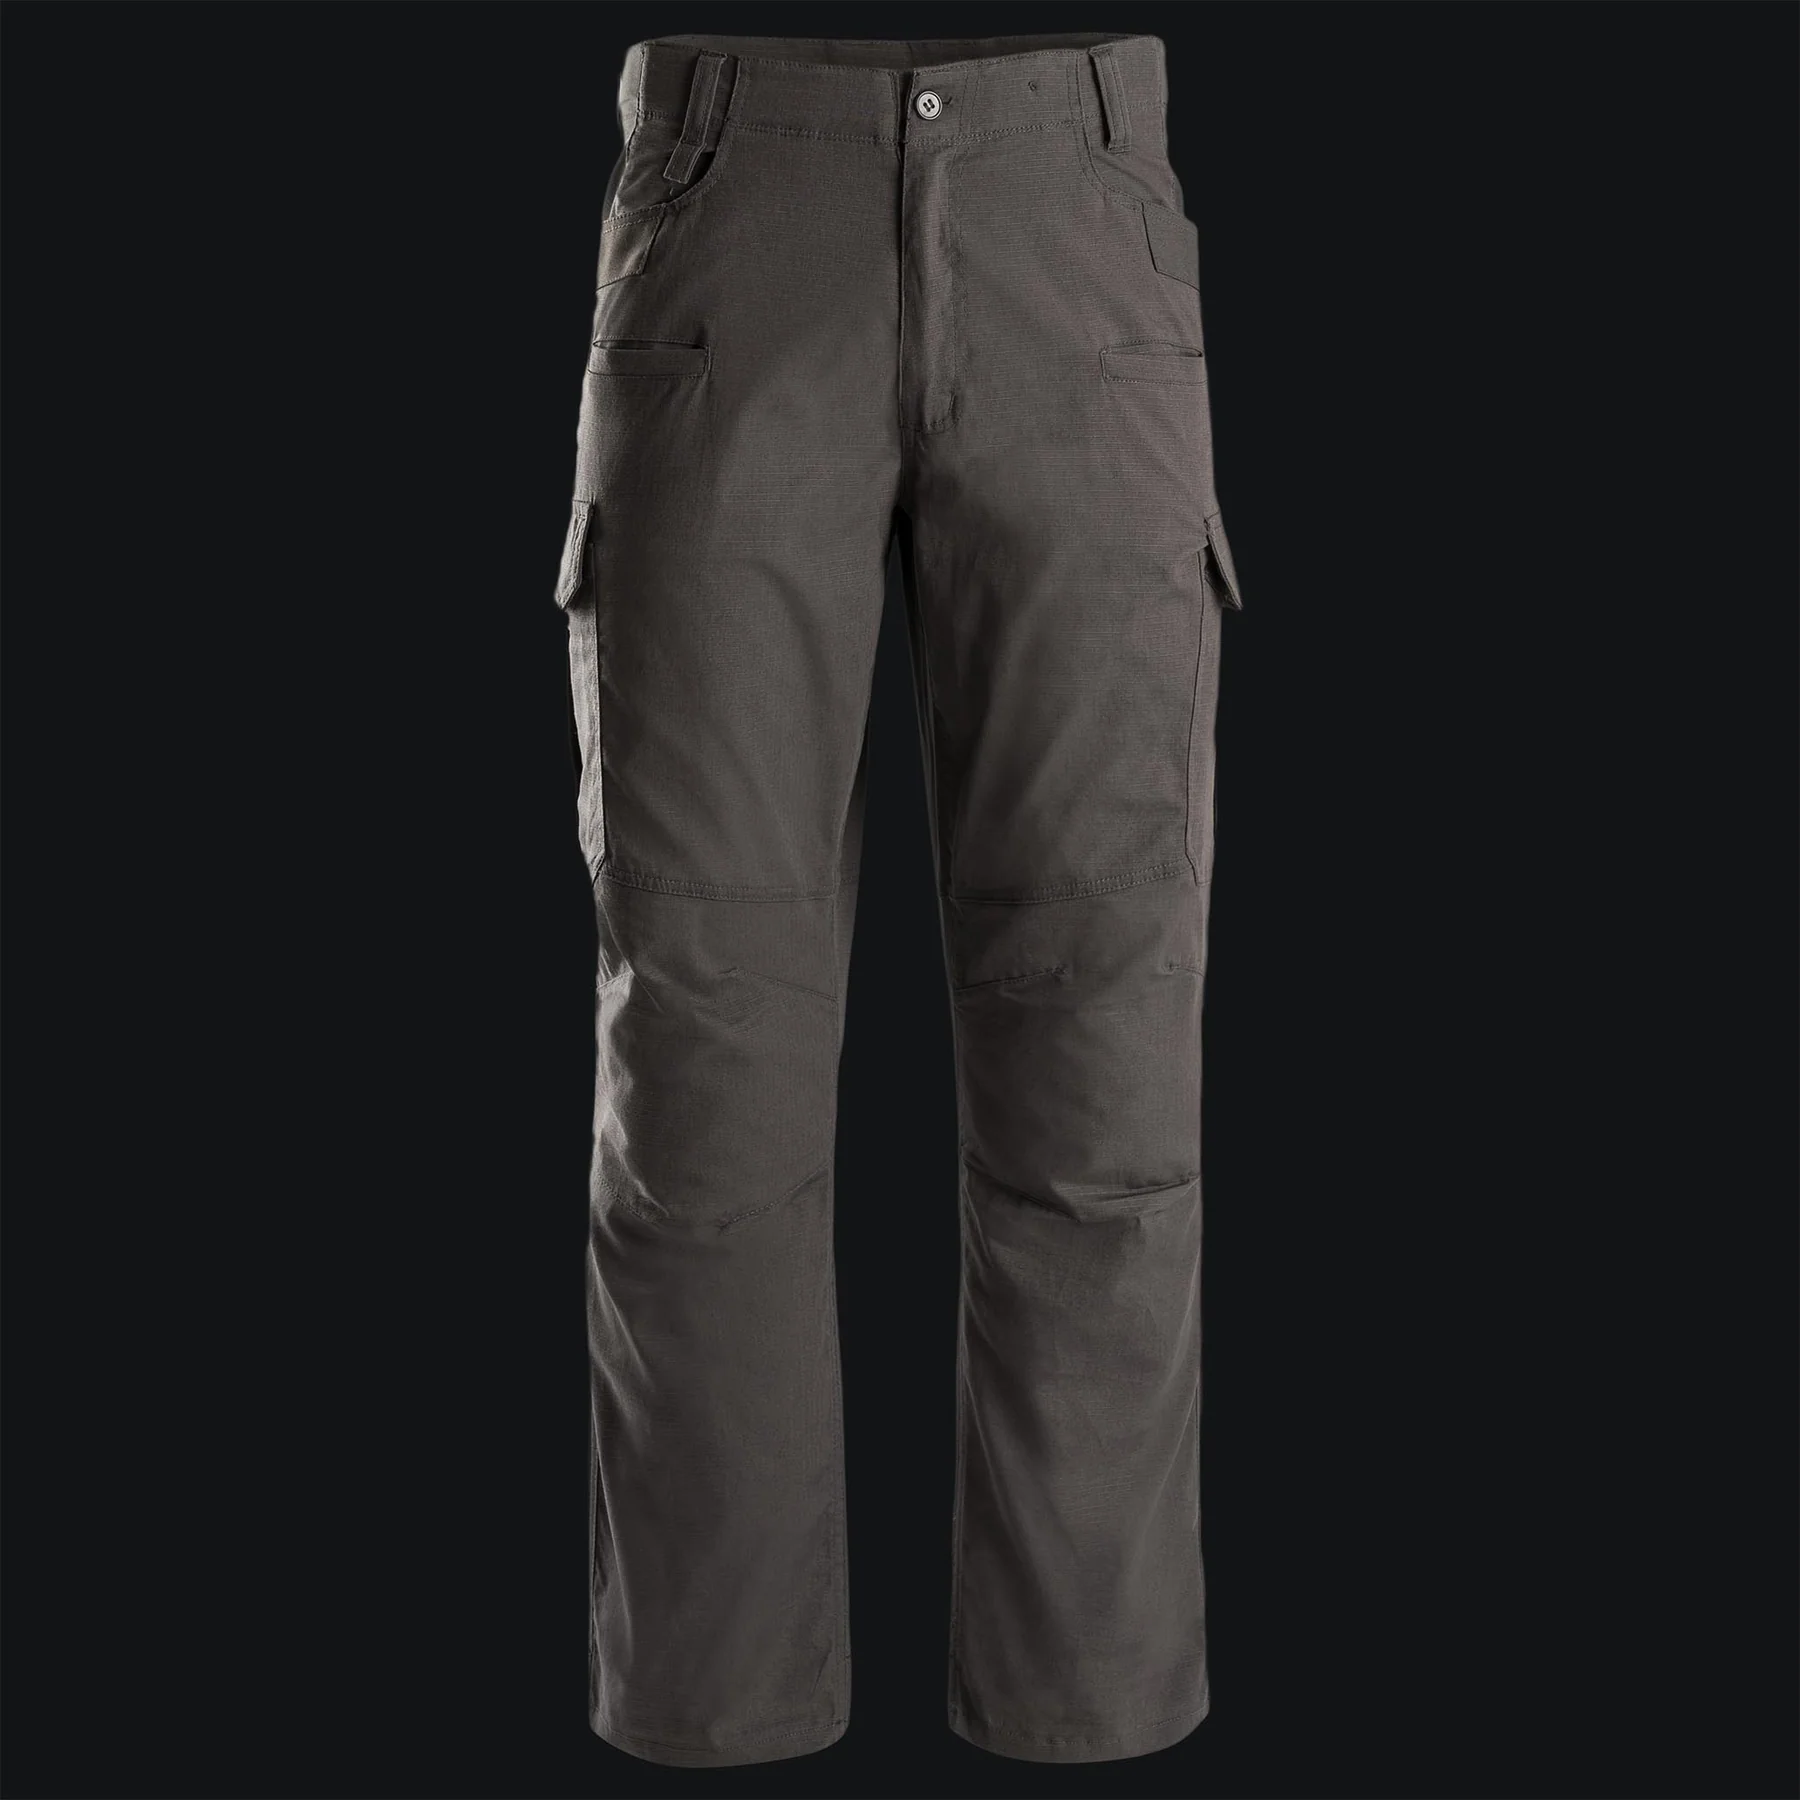 STOIRM TACTICAL Ripstop Combat Trousers- Grey